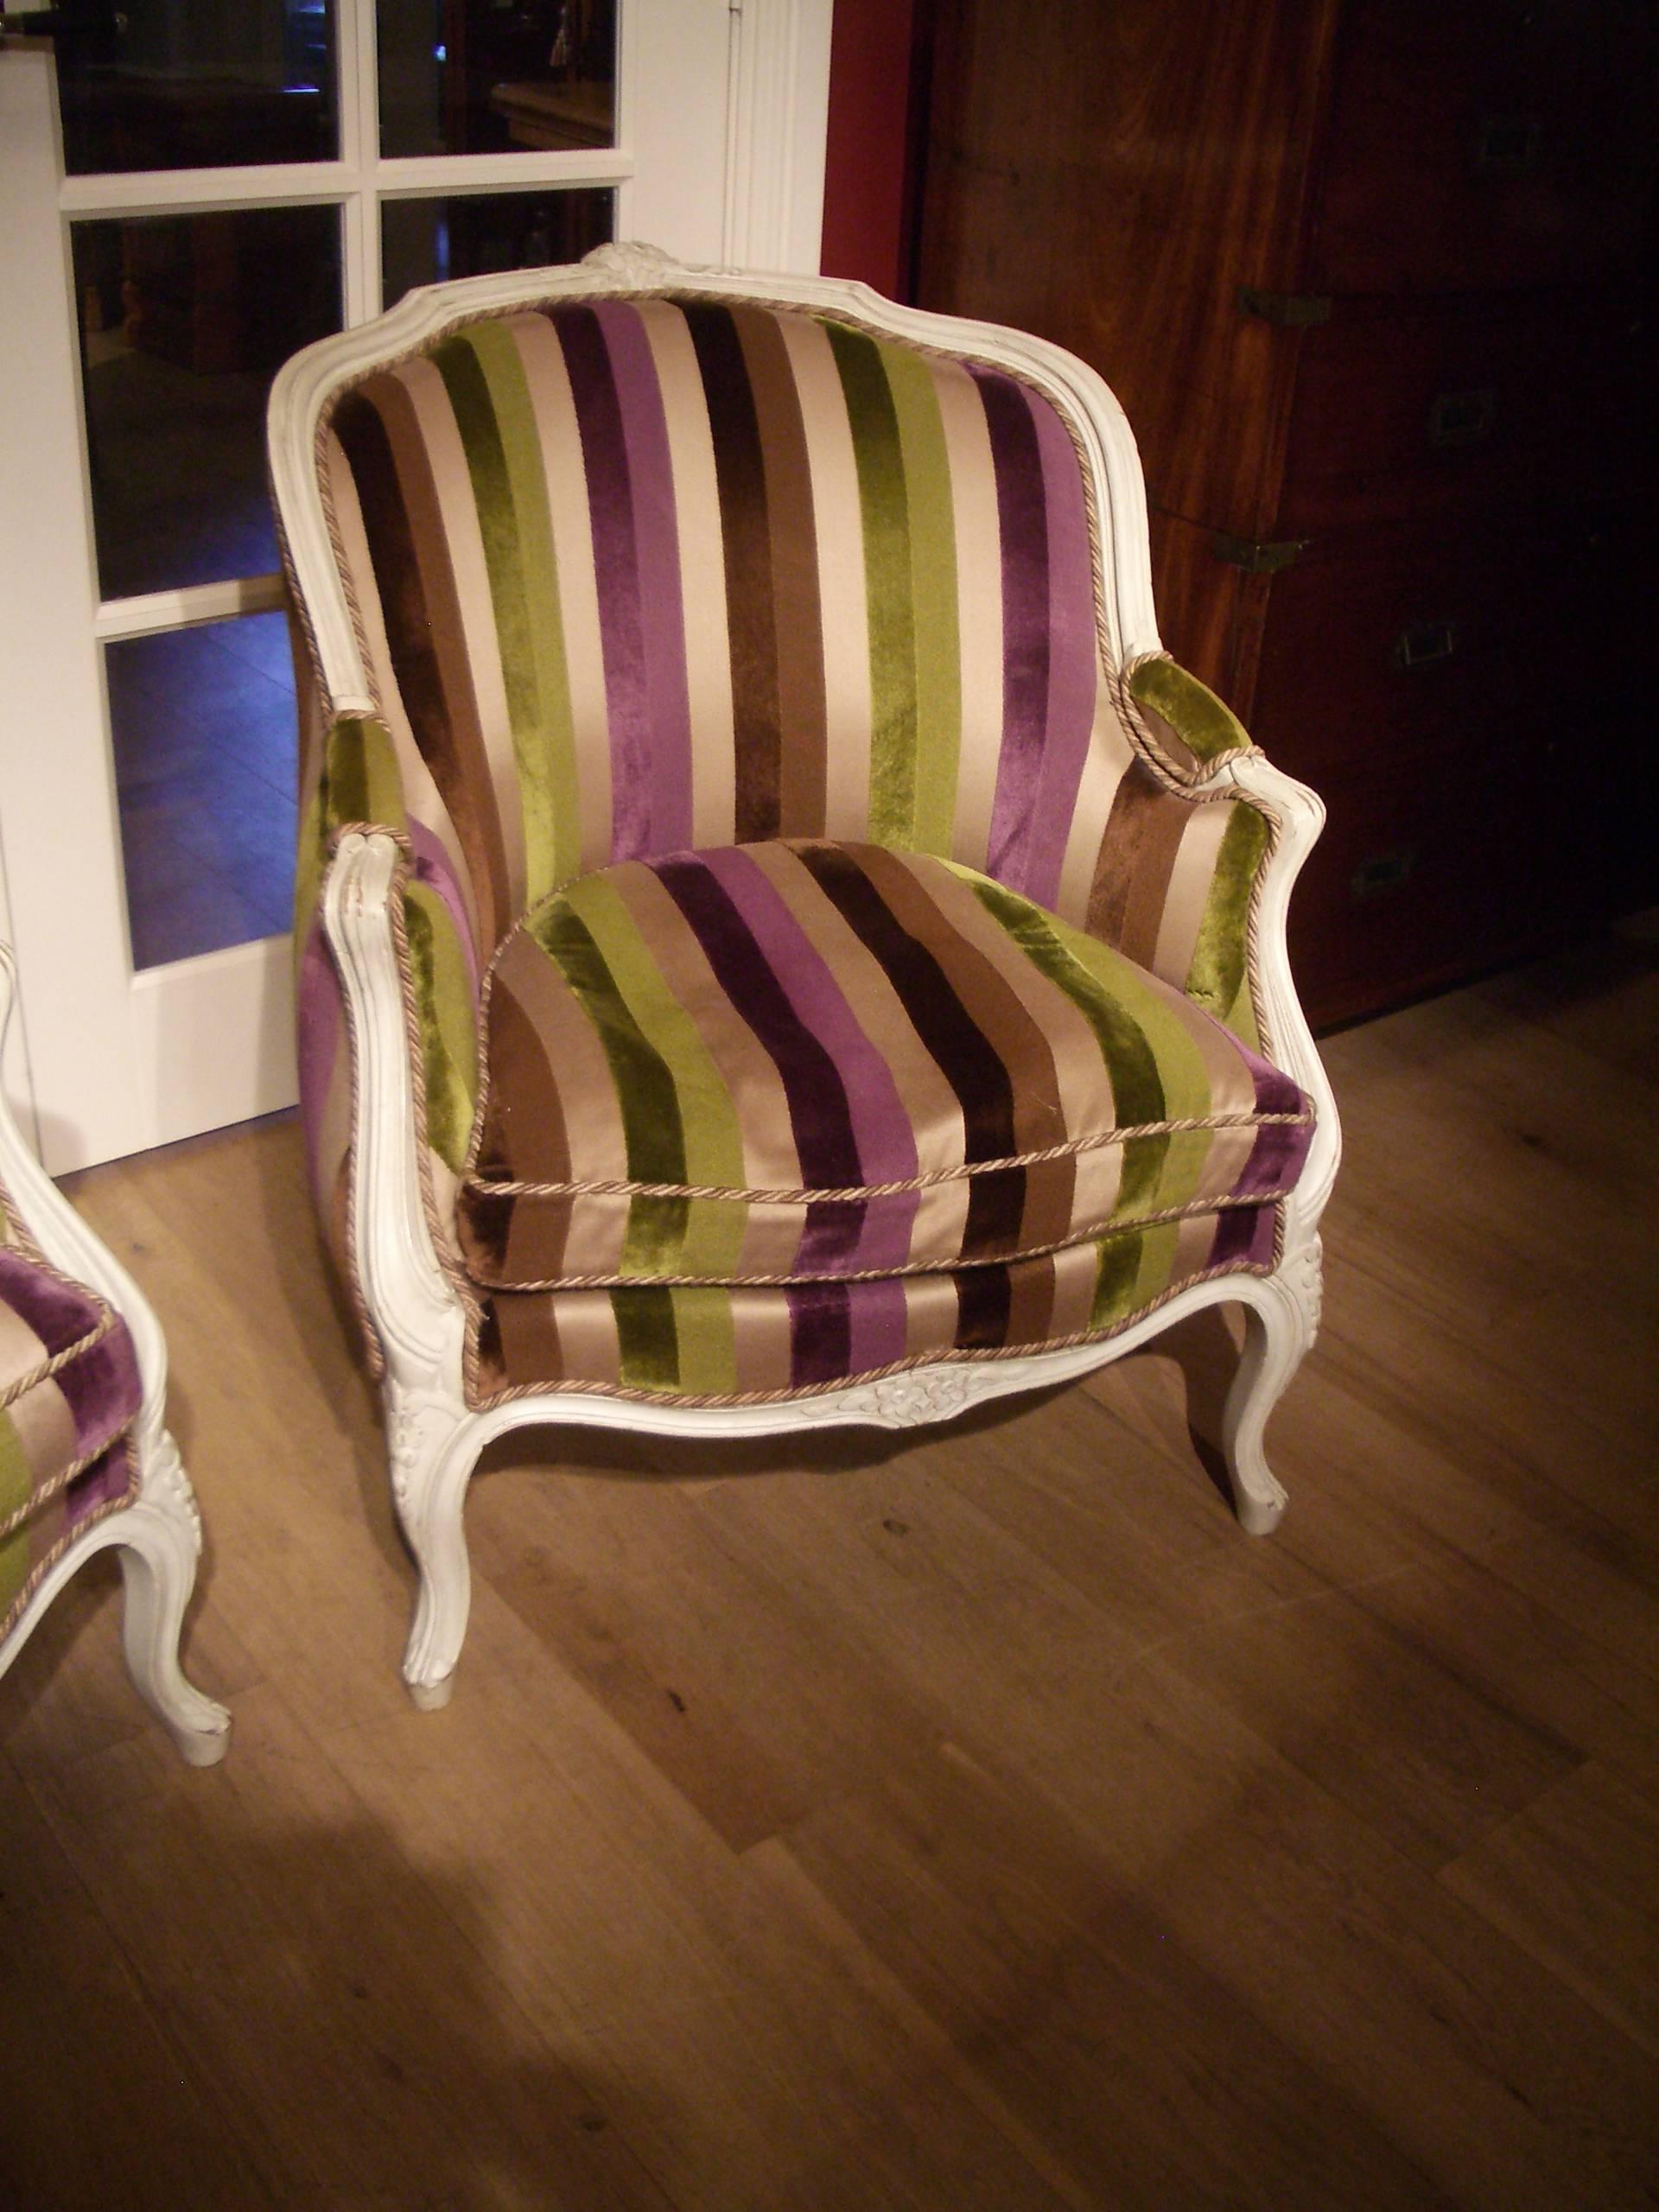 Two French armchairs. They are antique armchairs. The chairs have a nice off-white color. Upholstery is new.
Country: France.
Period: circa 1900.